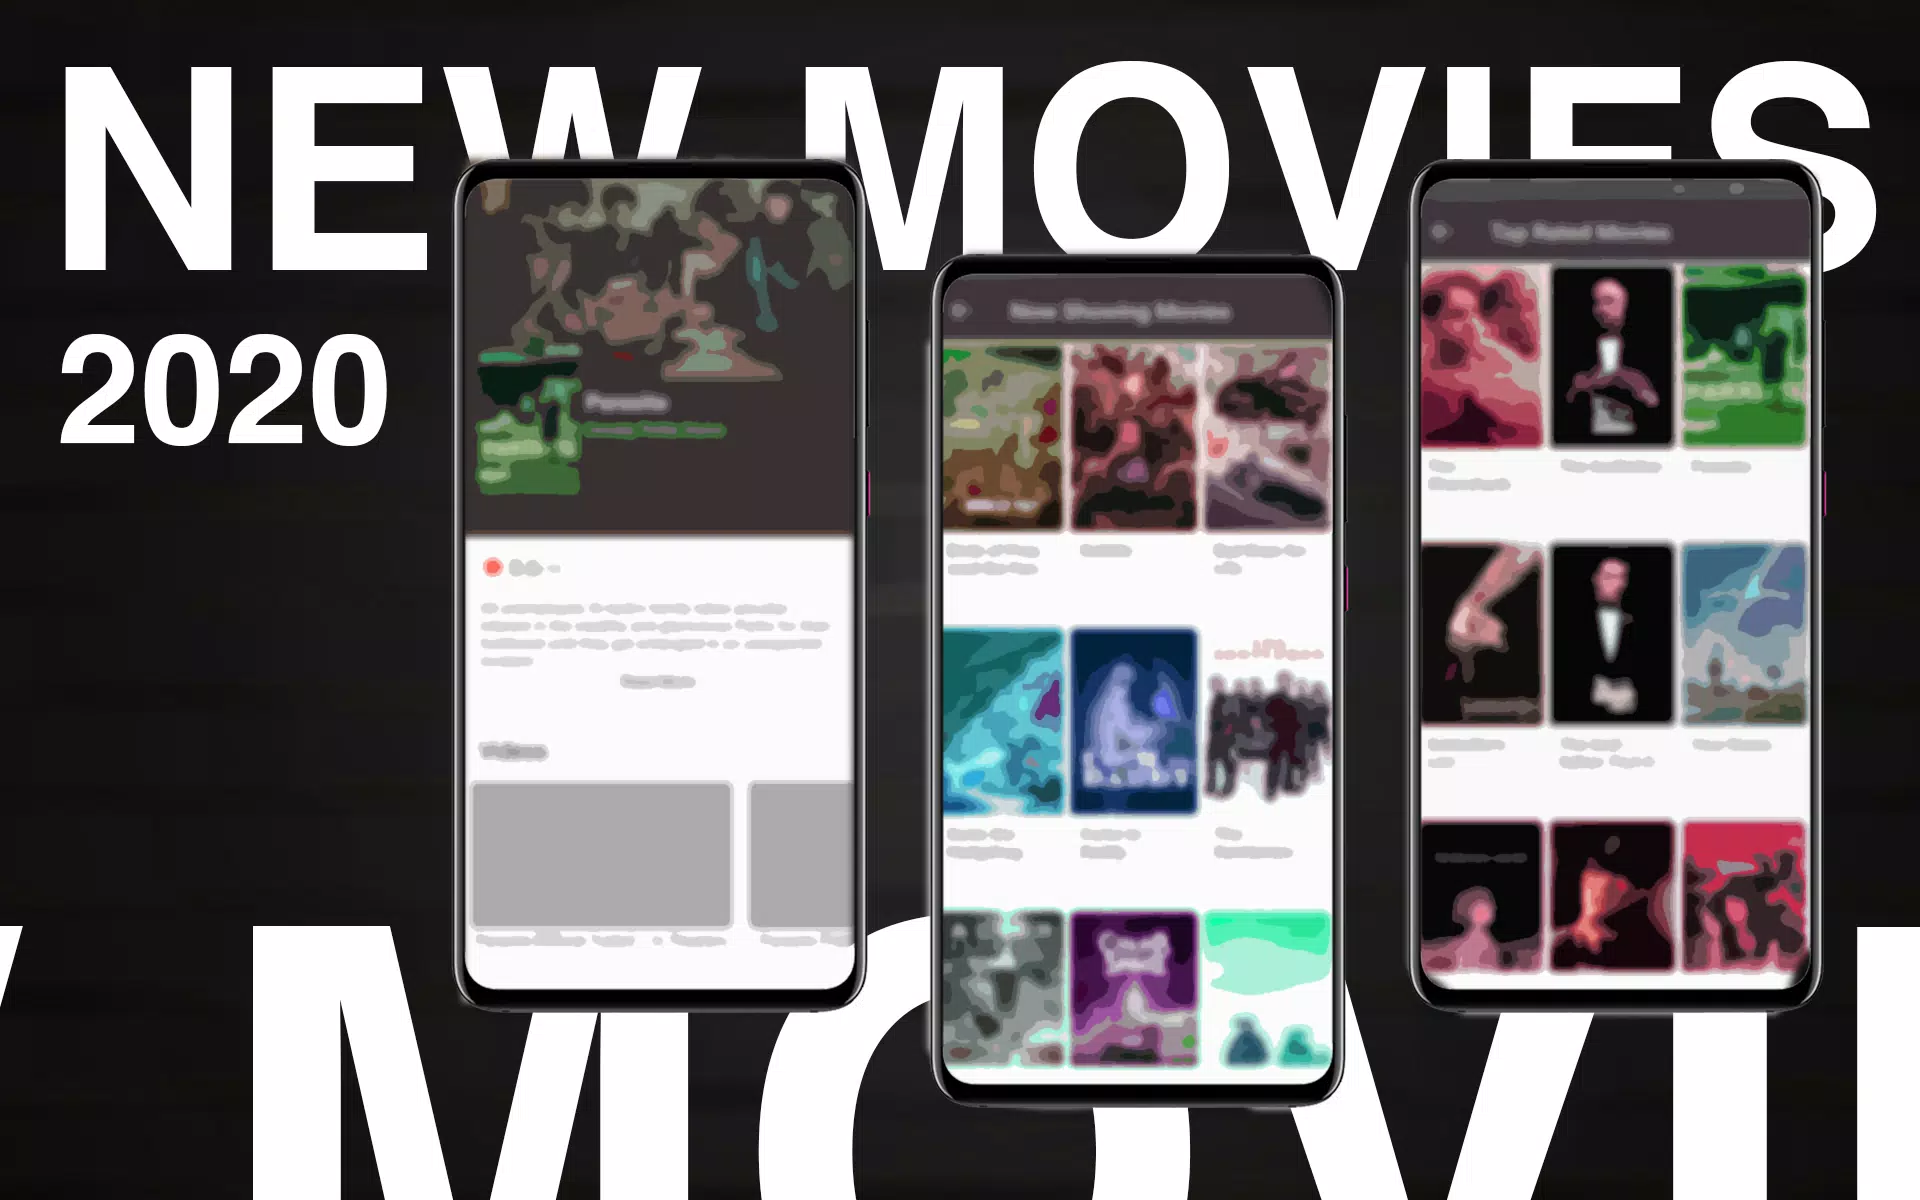 soap2day : movies & tv series for Android - APK Download